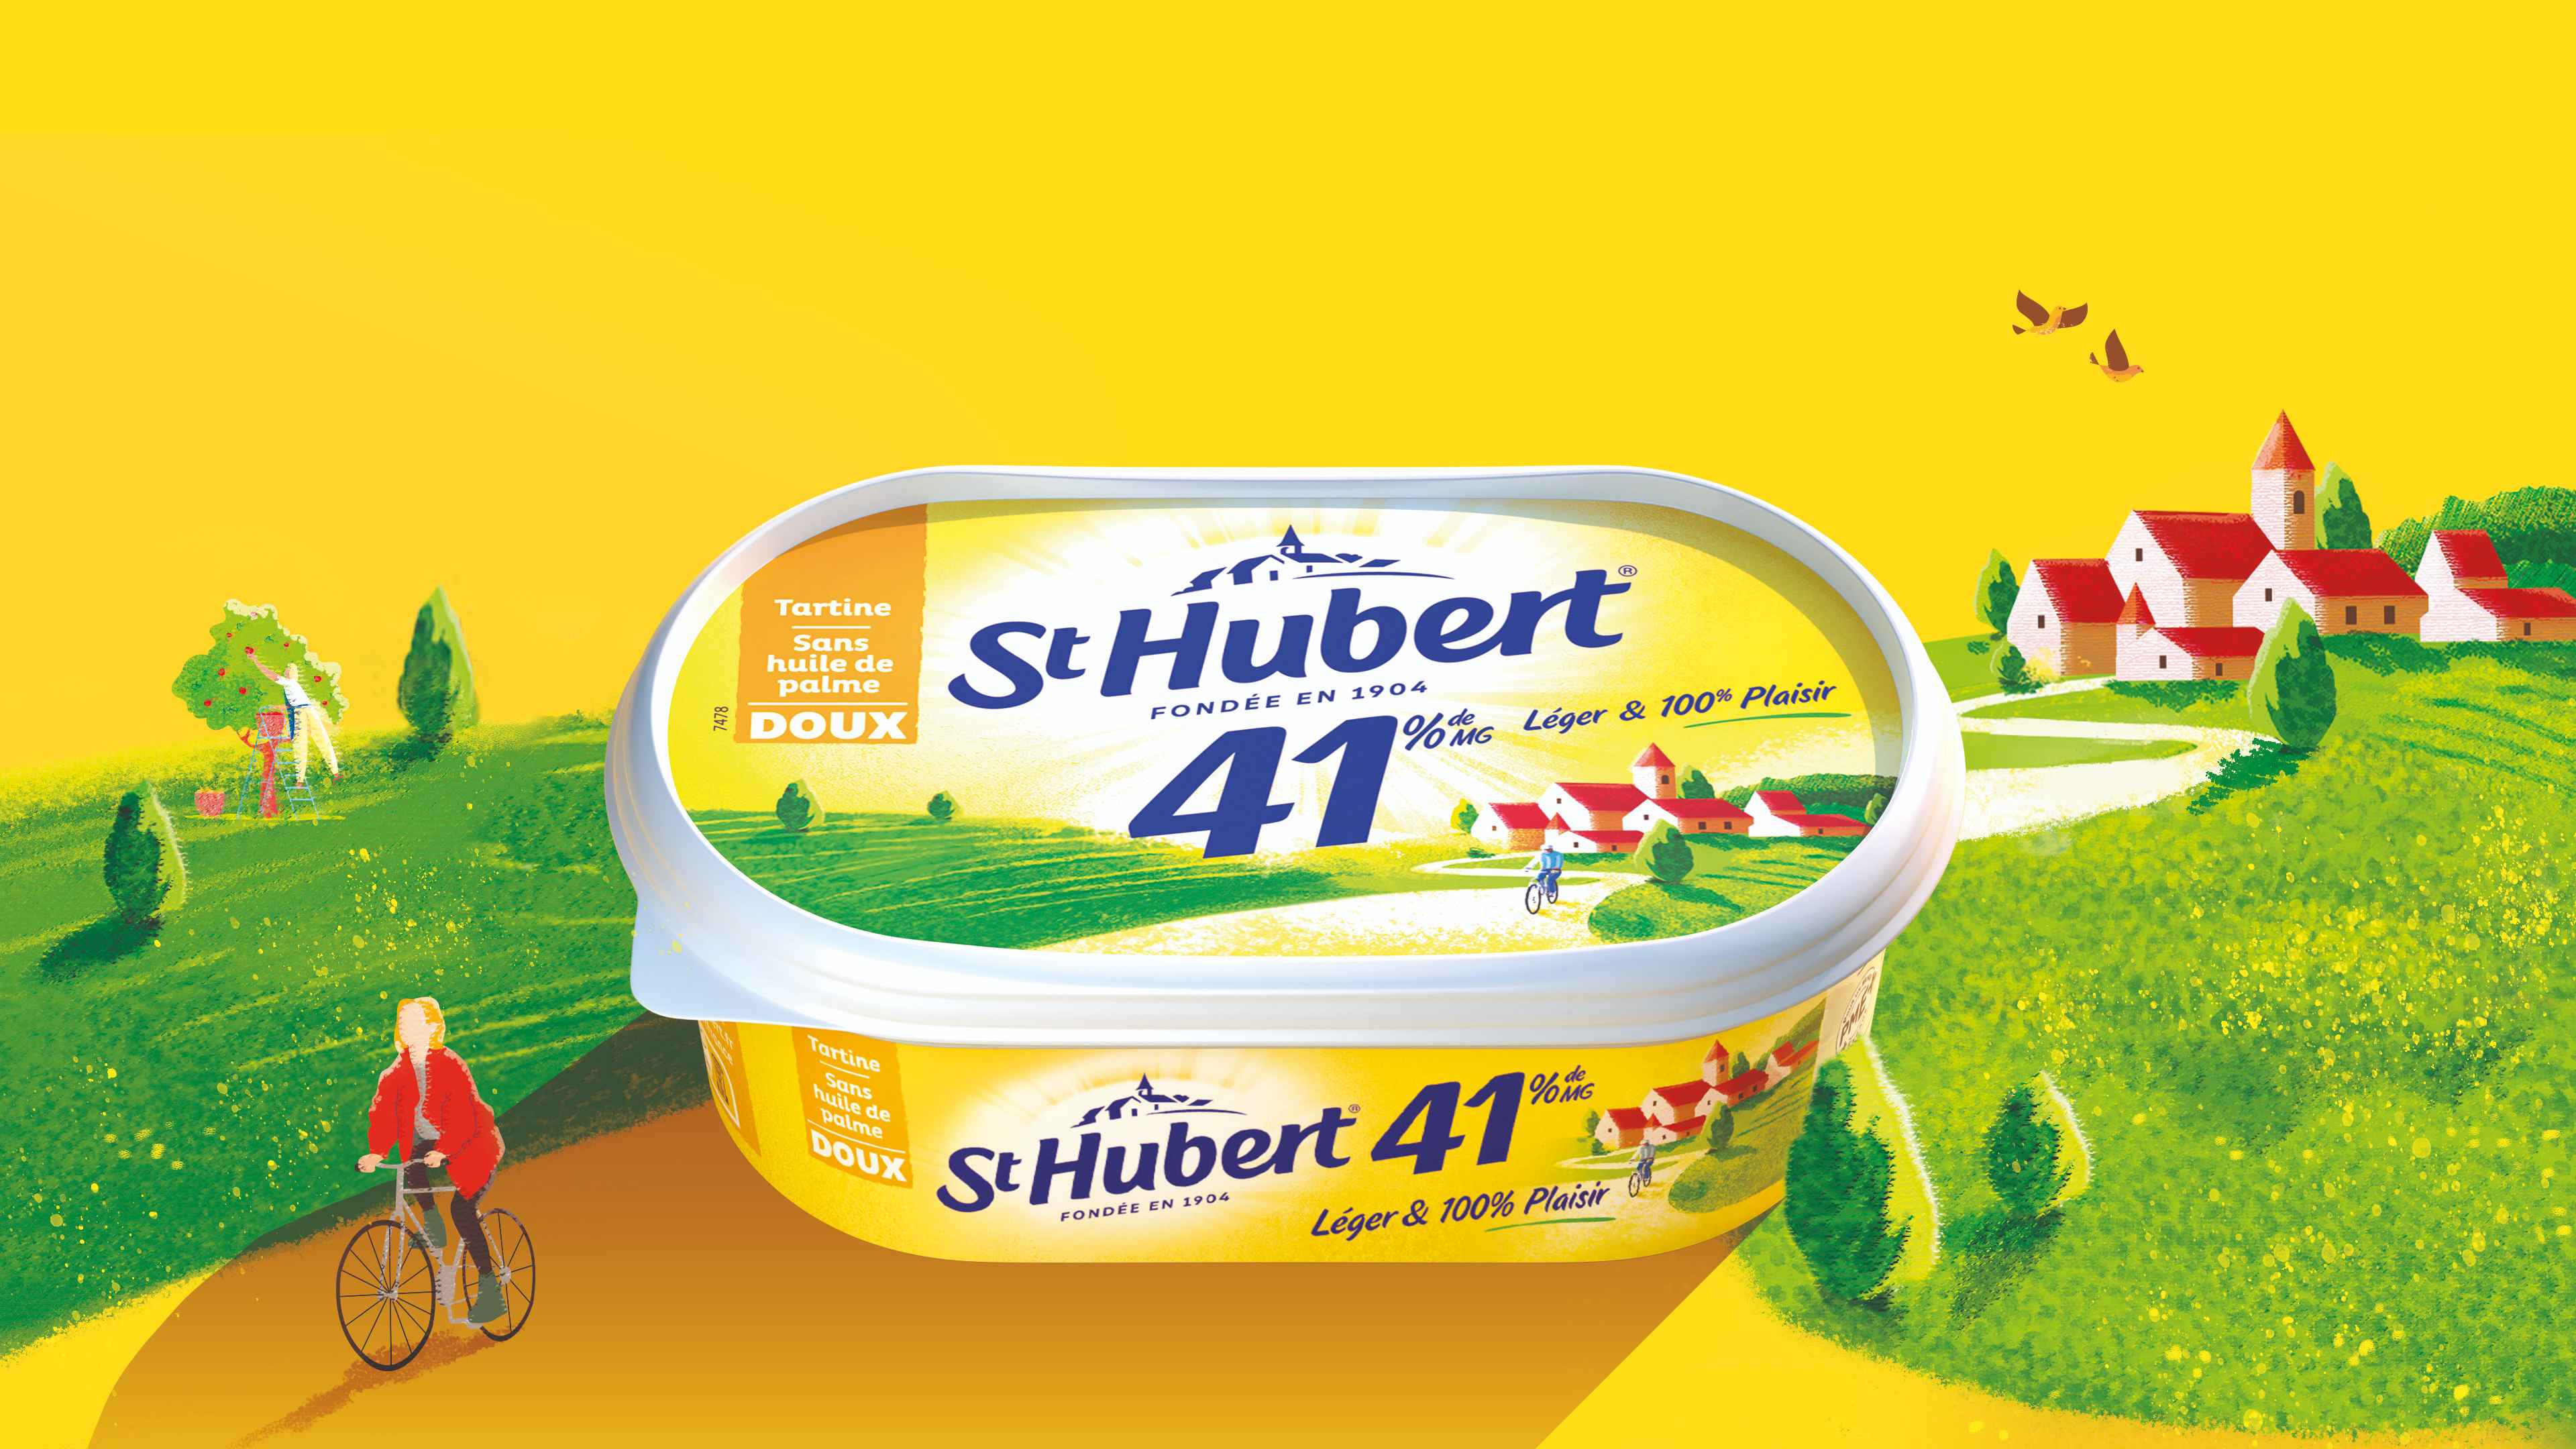 St Hubert’s New Identity and Innovations Created by Lonsdale